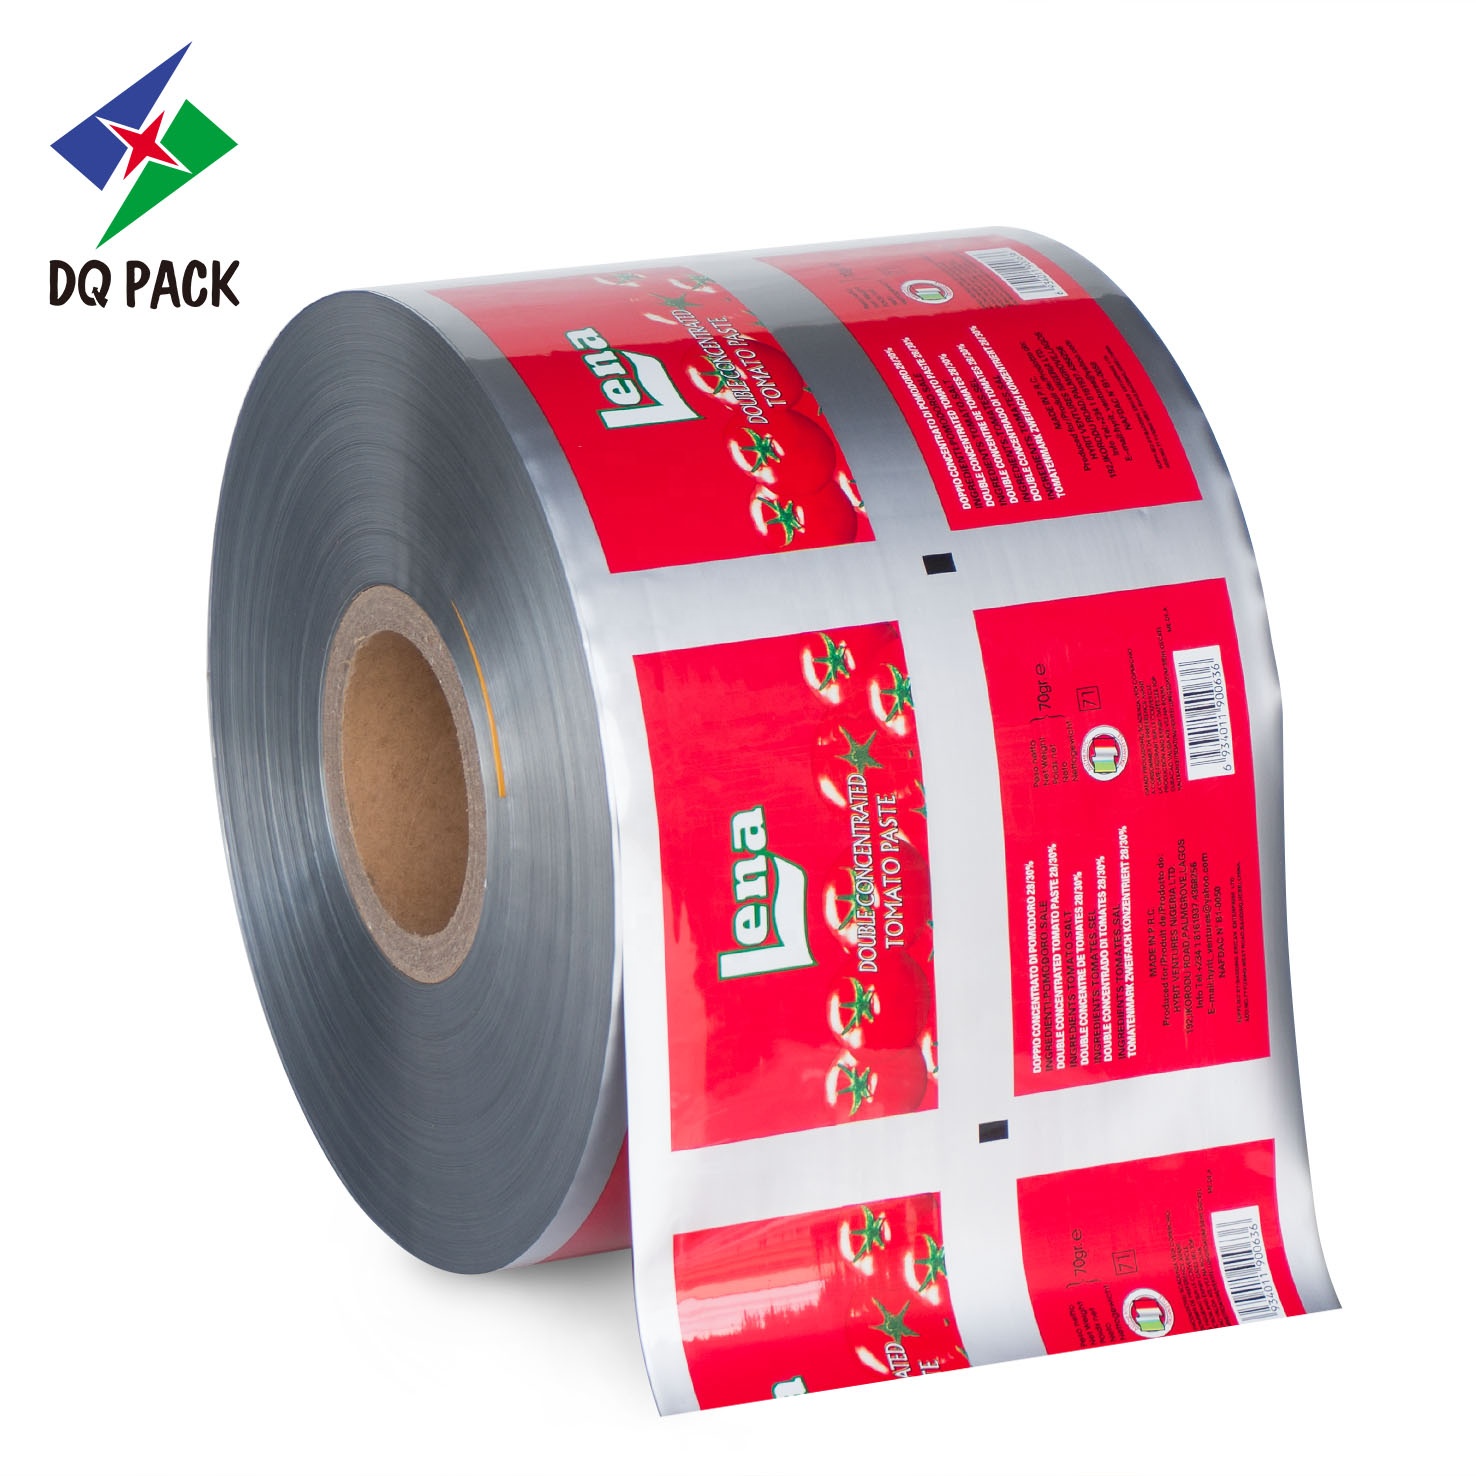 DQ PACK Made in China aluminum foil laminated plastic film roll for tomato sauce